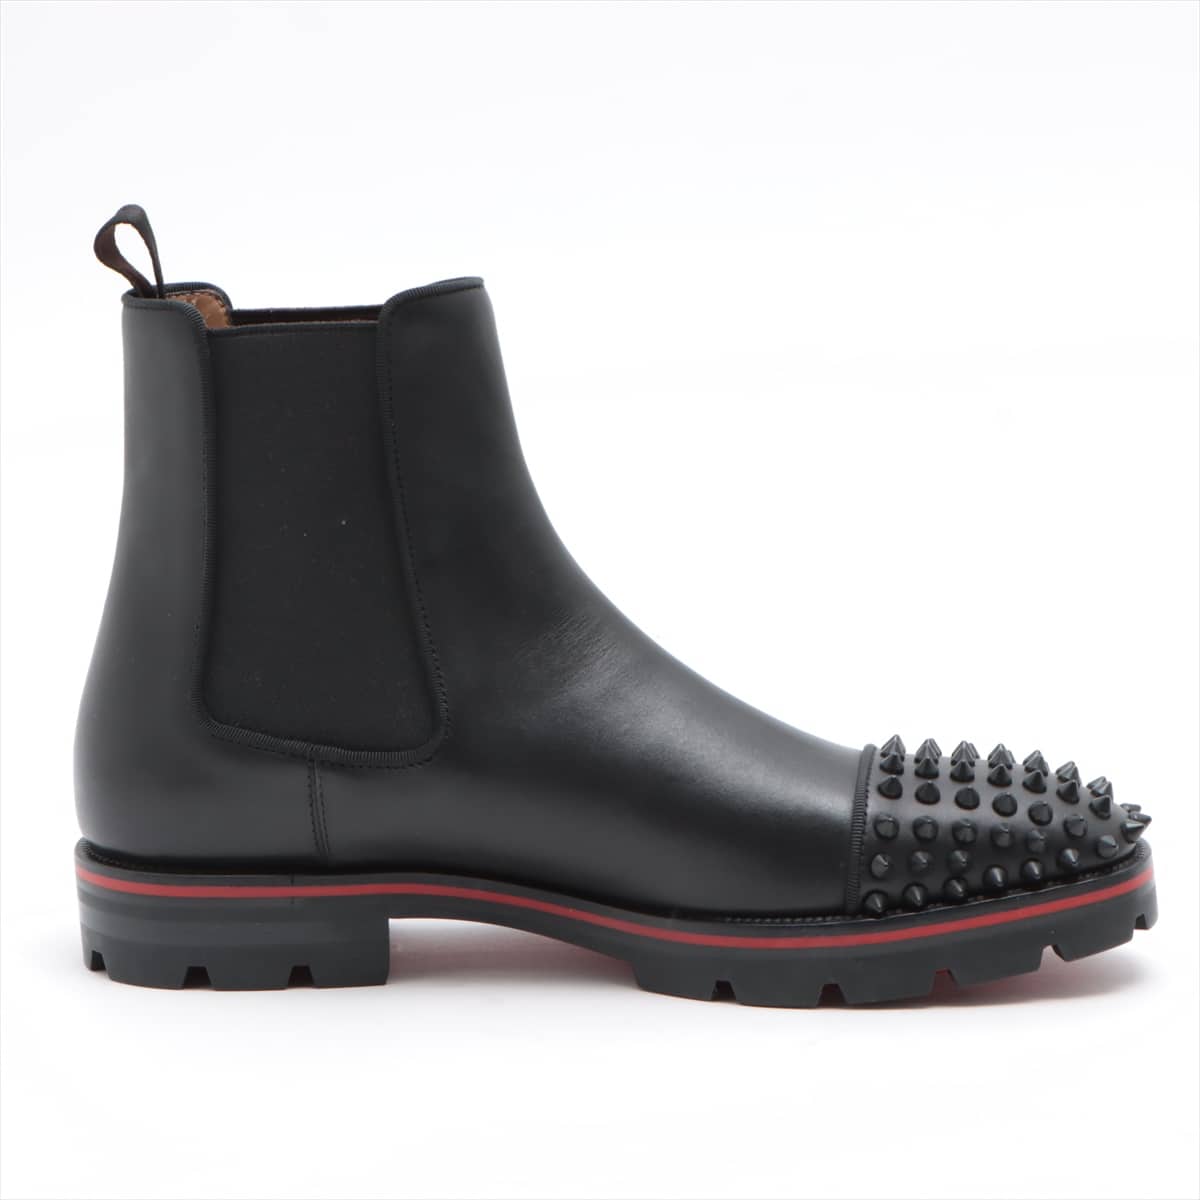 Christian Louboutin Leather Side Gore Boots 40 Men's Black Spike Studs